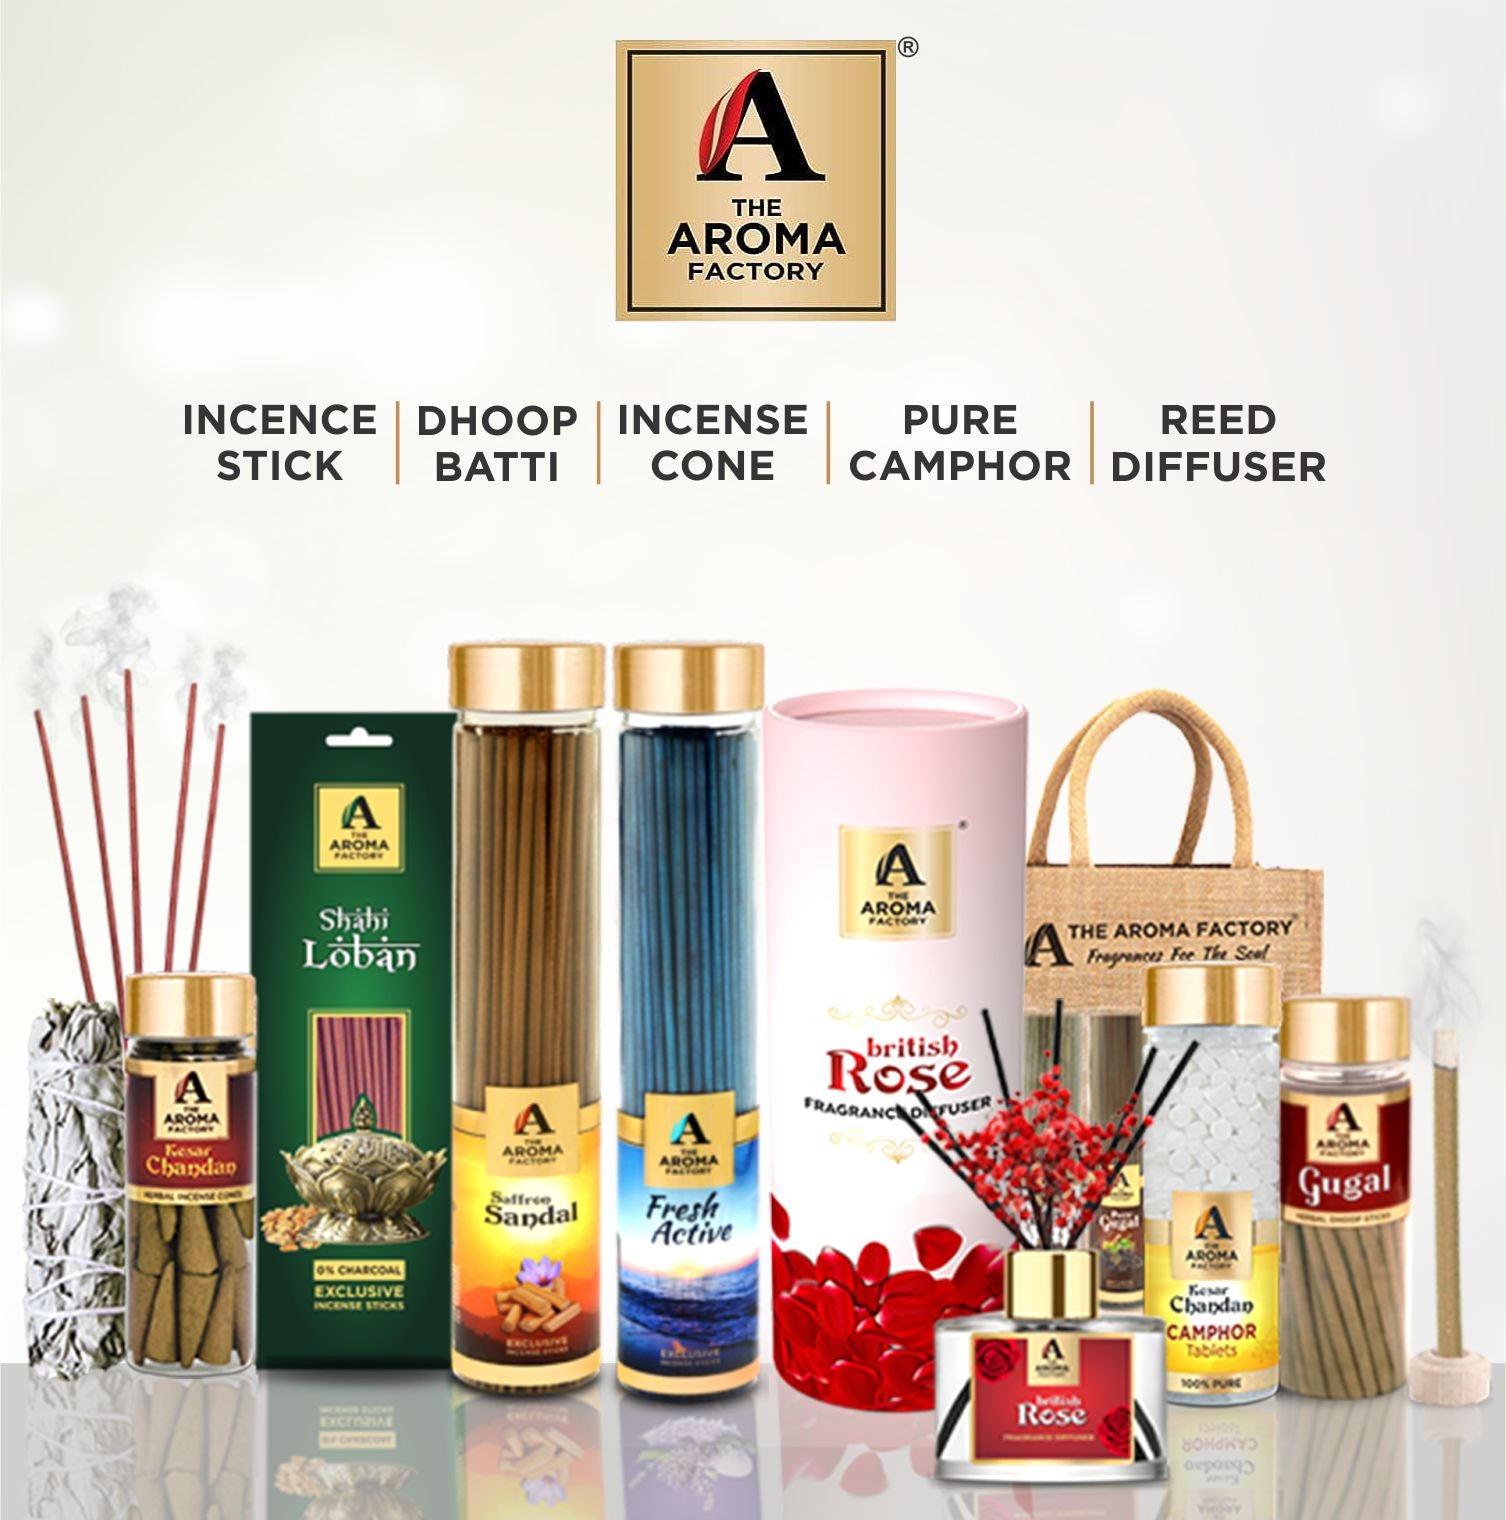 The Aroma Factory Happy Birthday Dadi Grand Mom Gift with Card, Lemongrass Fragrance Reed Diffuser Set (1 Box + 1 Card)